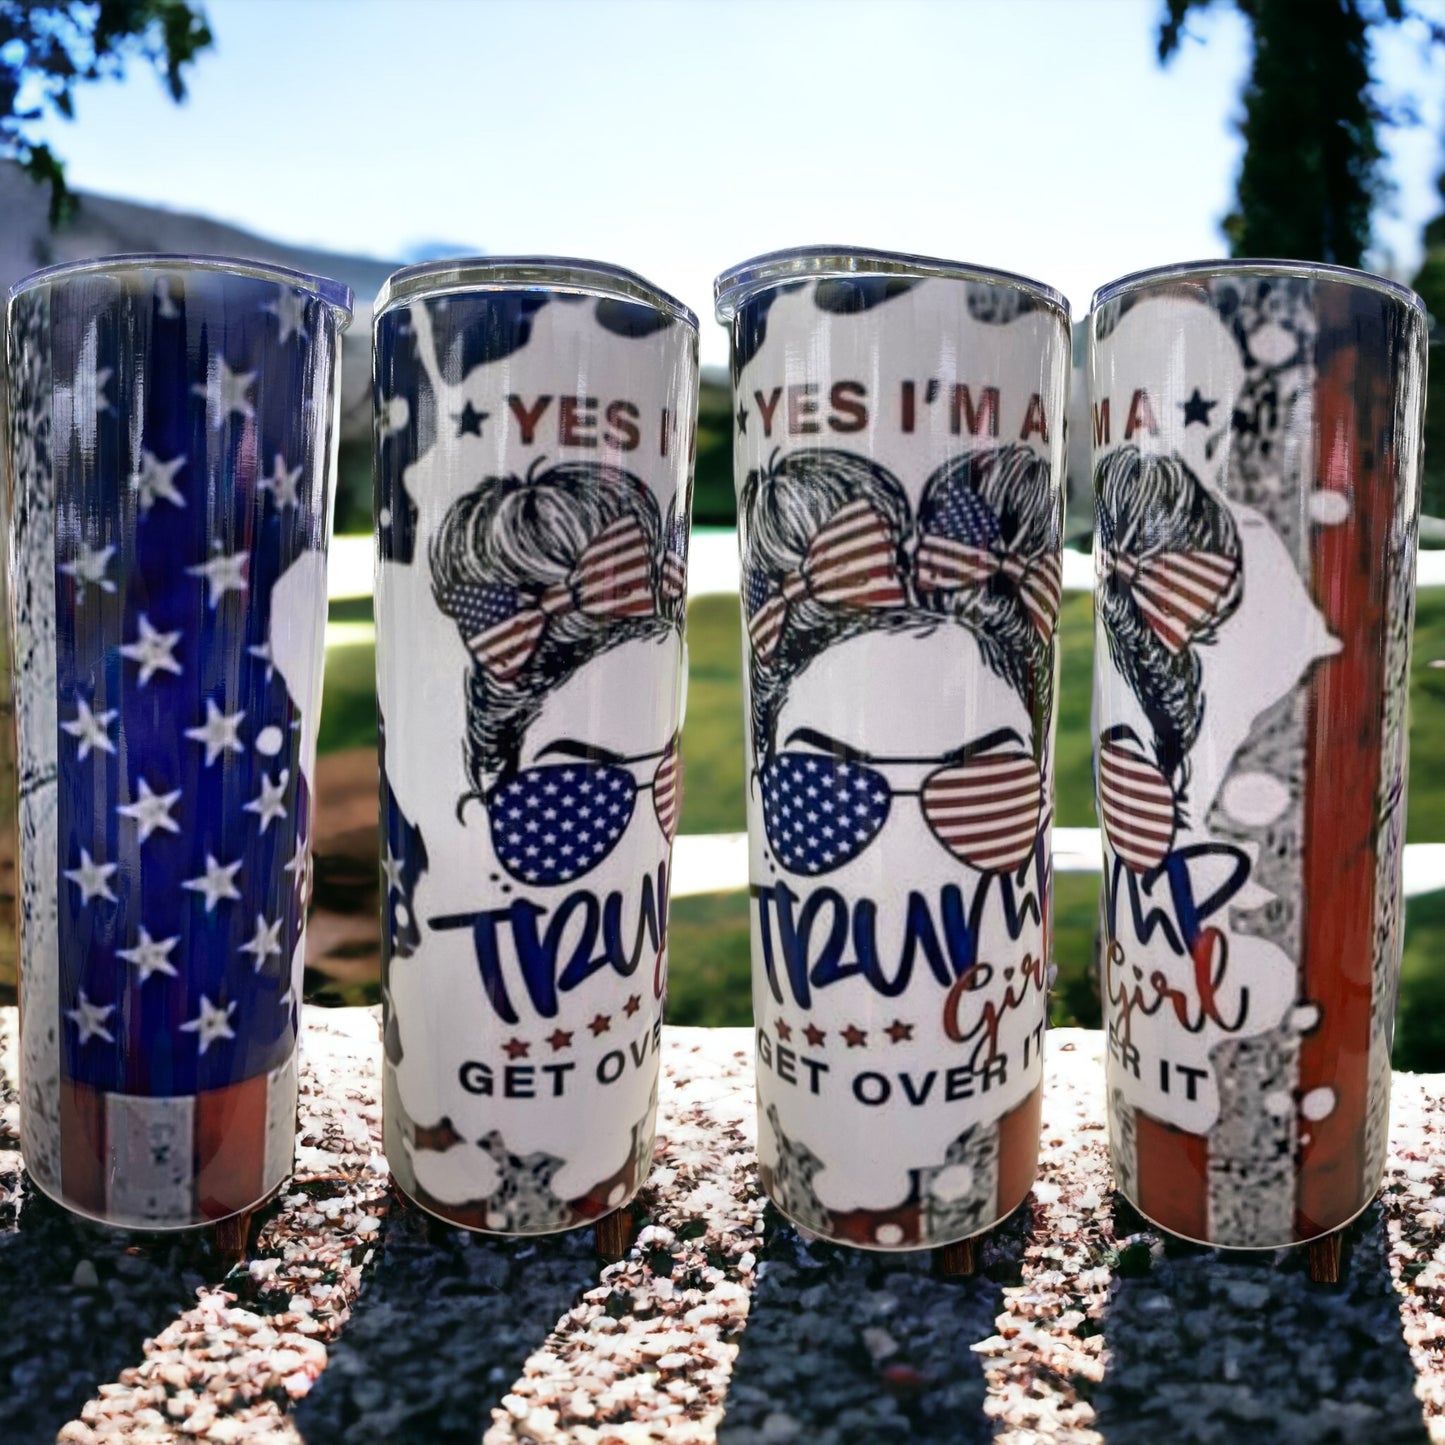 20 OZ Tumbler- Yes I’m a Trump girl get over it.